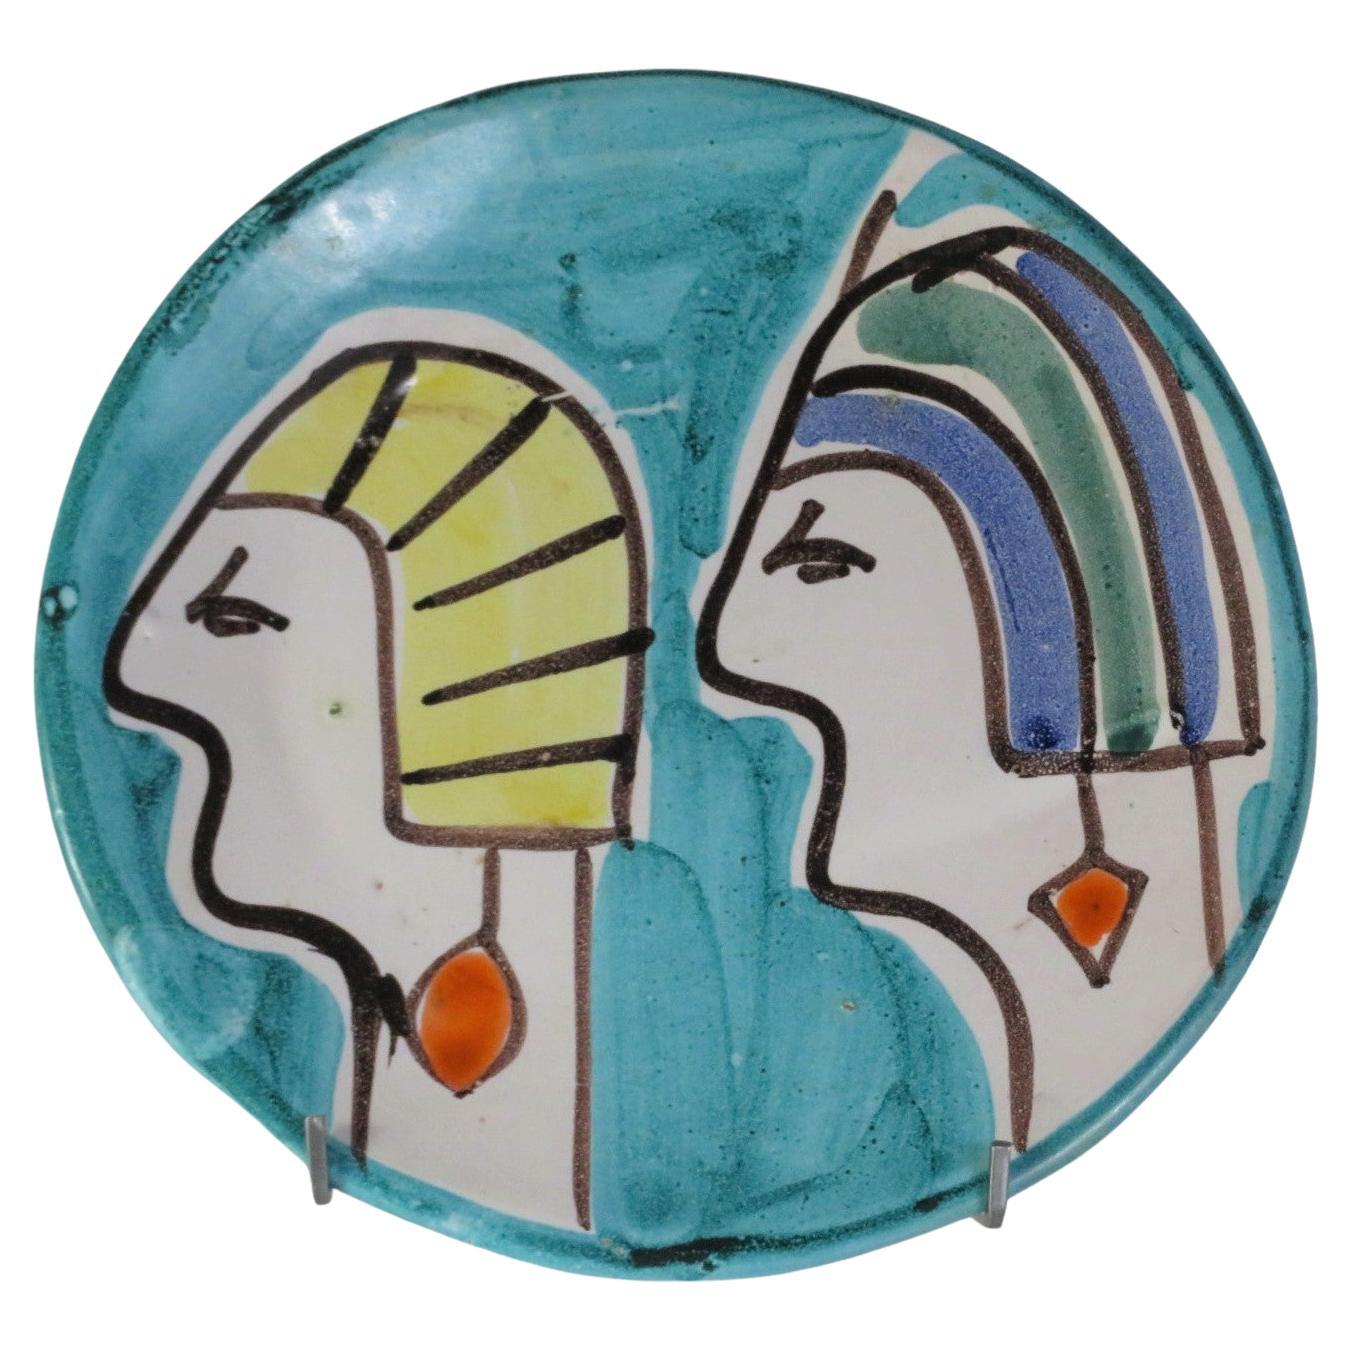 1960s Italian Egyptian themed, hand painted decorative plate. Reminiscent of Desimone painted designs, marked on the back in the clay Italy. The profile of two Egyptian heads facing in the same direction. Probably influenced by the making of the